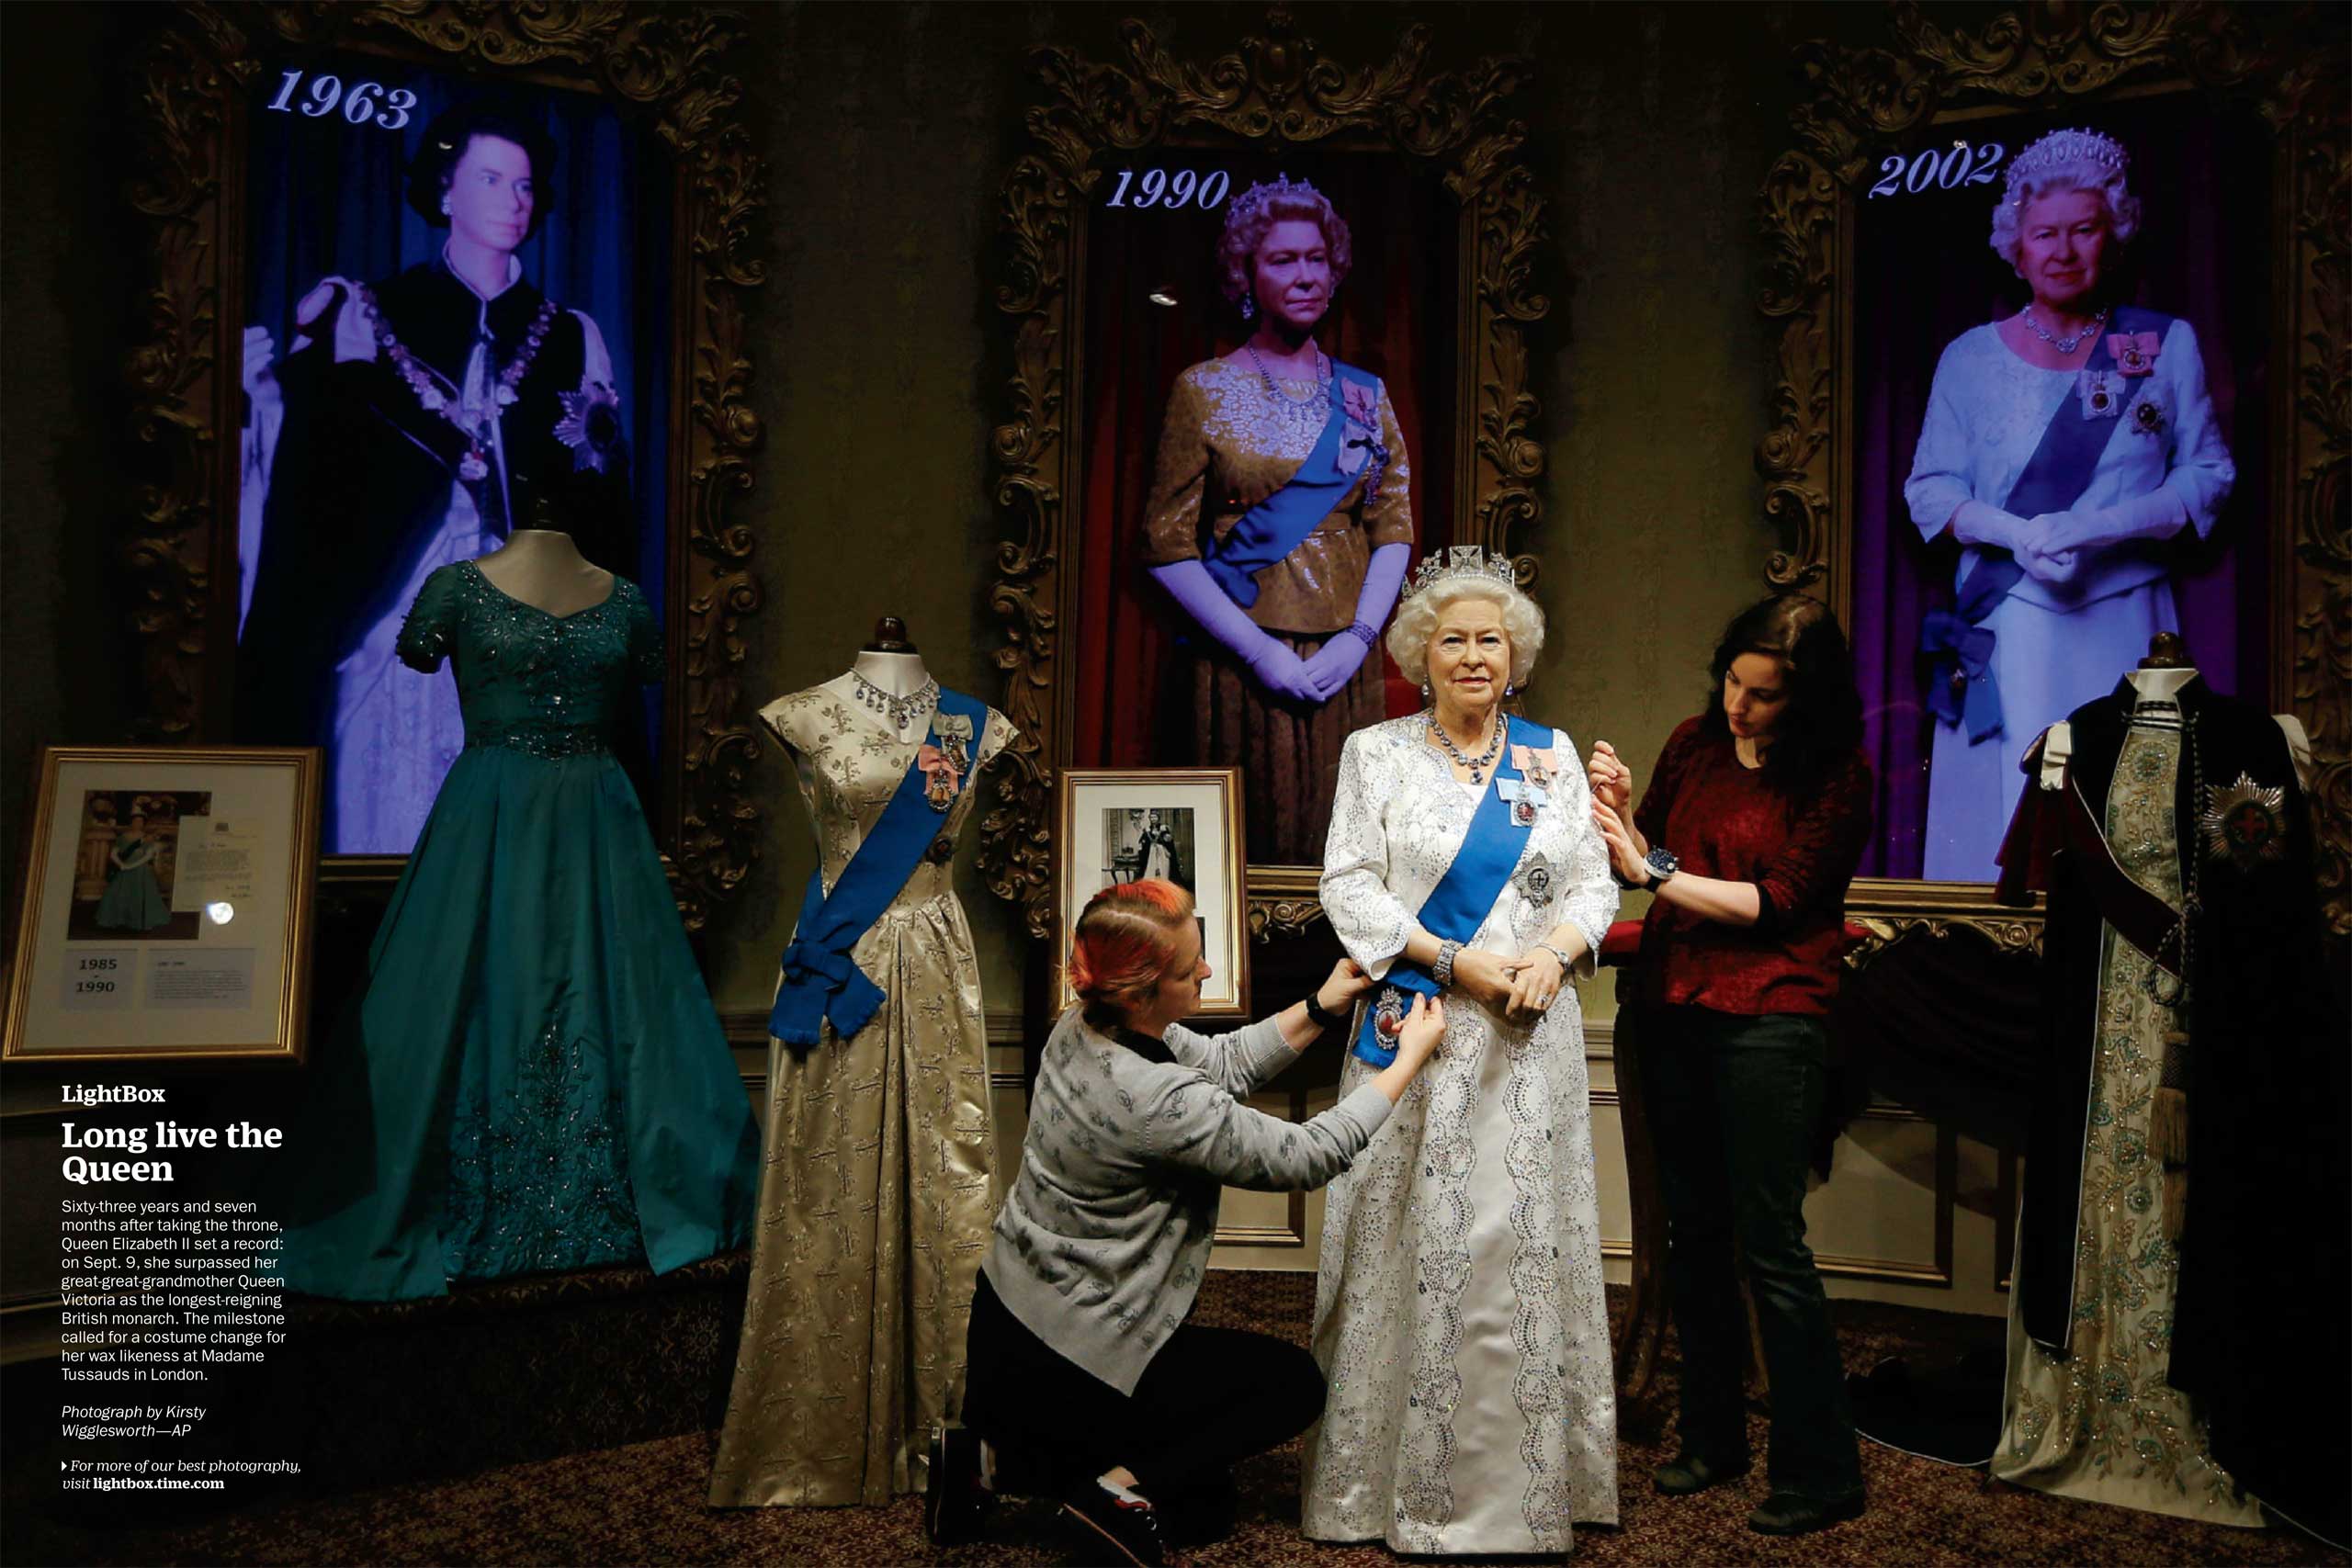 Photograph by Kirsty Wigglesworth—AP
                              Sixty-three years and seven months after taking the throne, Queen Elizabeth II set a record: on Sept. 9, she surpassed her great-great-grandmother Queen Victoria as the longest-reigning British monarch. The milestone called for a costume change for her wax likeness at Madame Tussauds in London. (Time issue September 21, 2015)